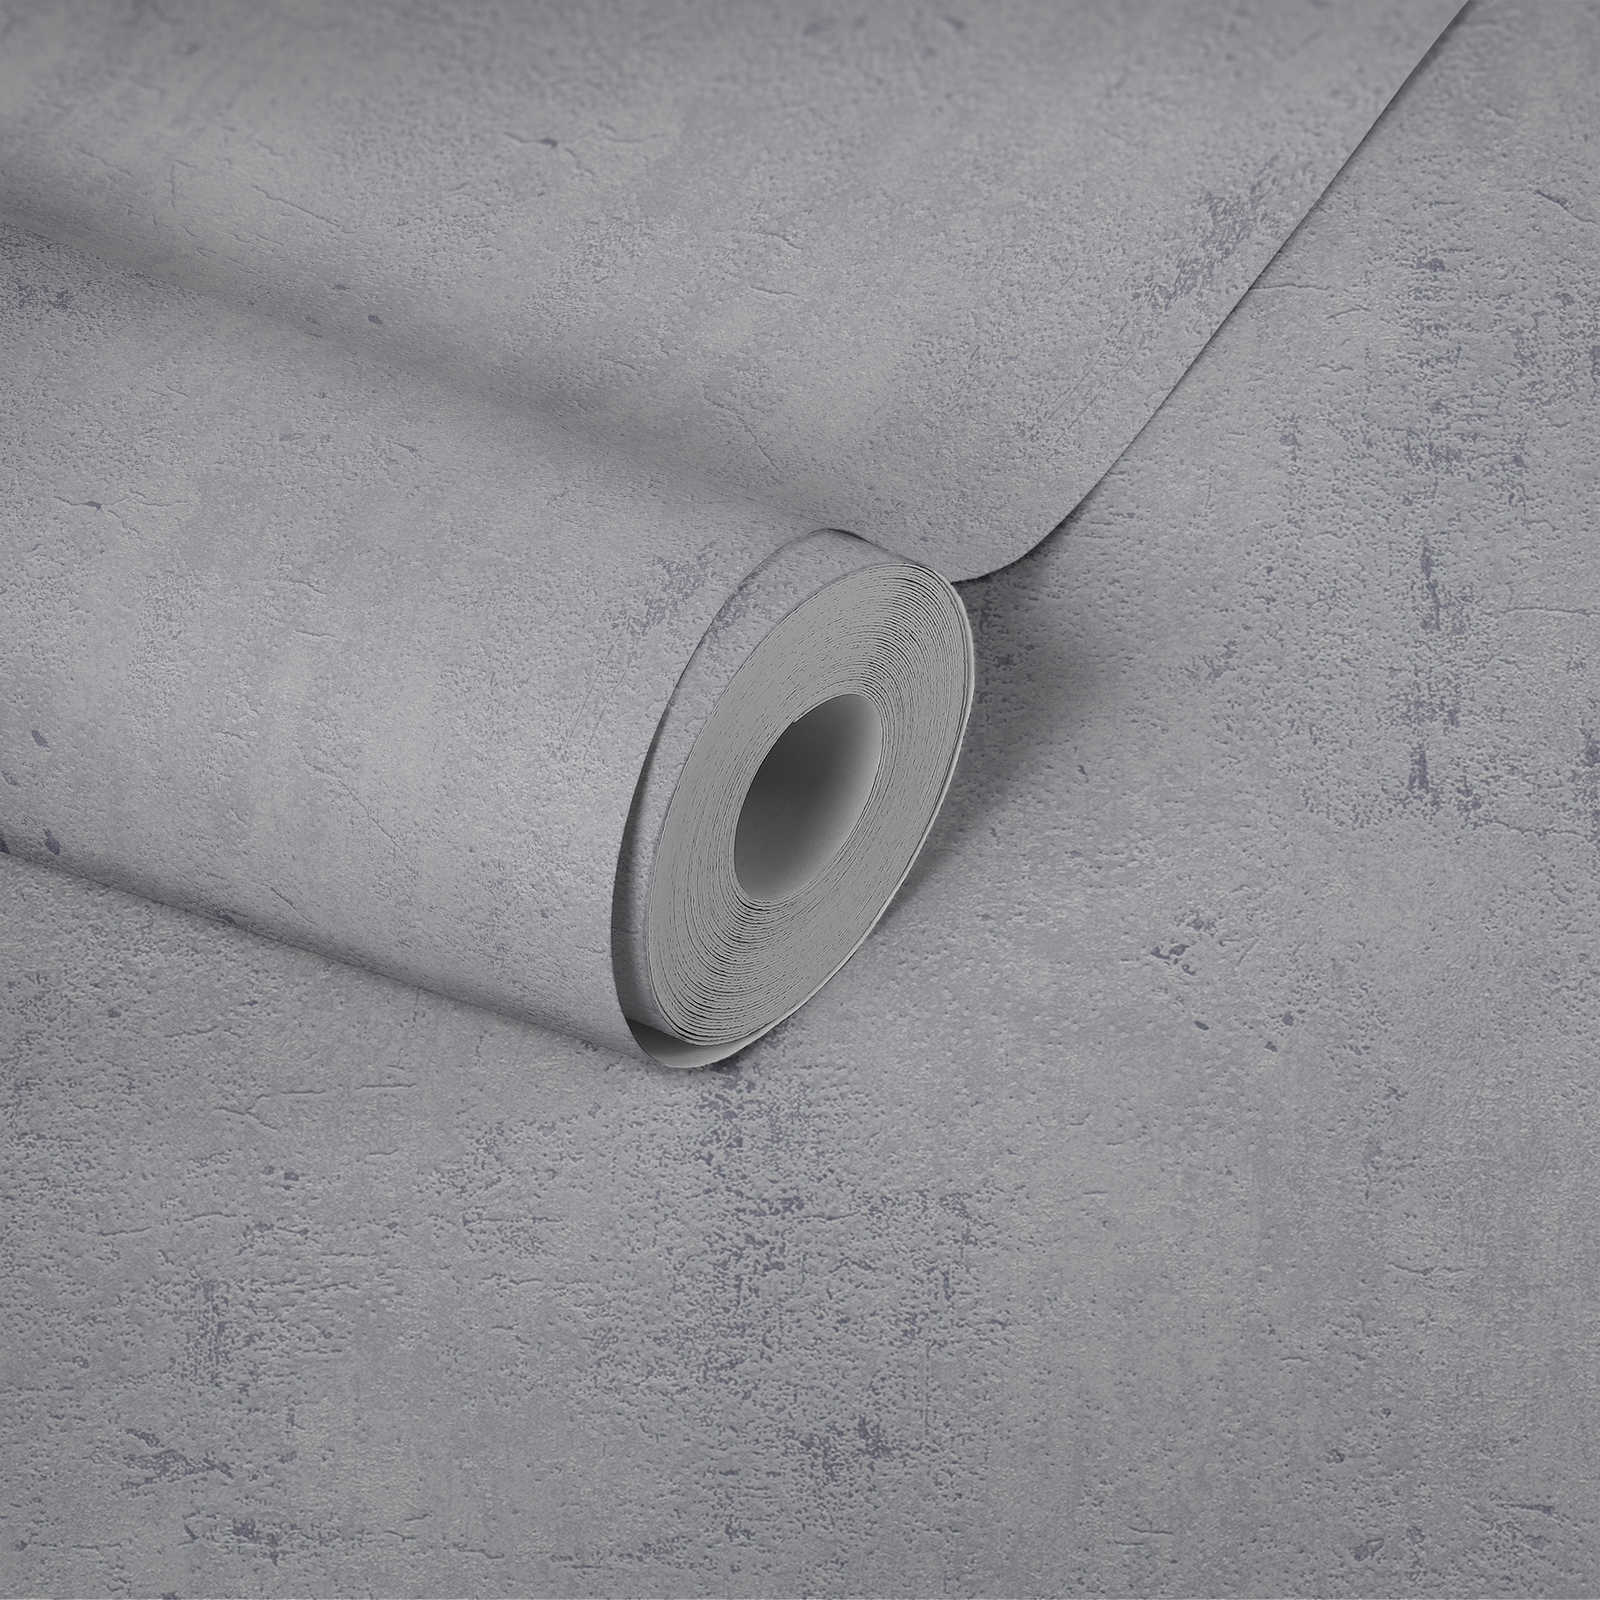             Plain wallpaper with concrete look in rustic design - grey
        